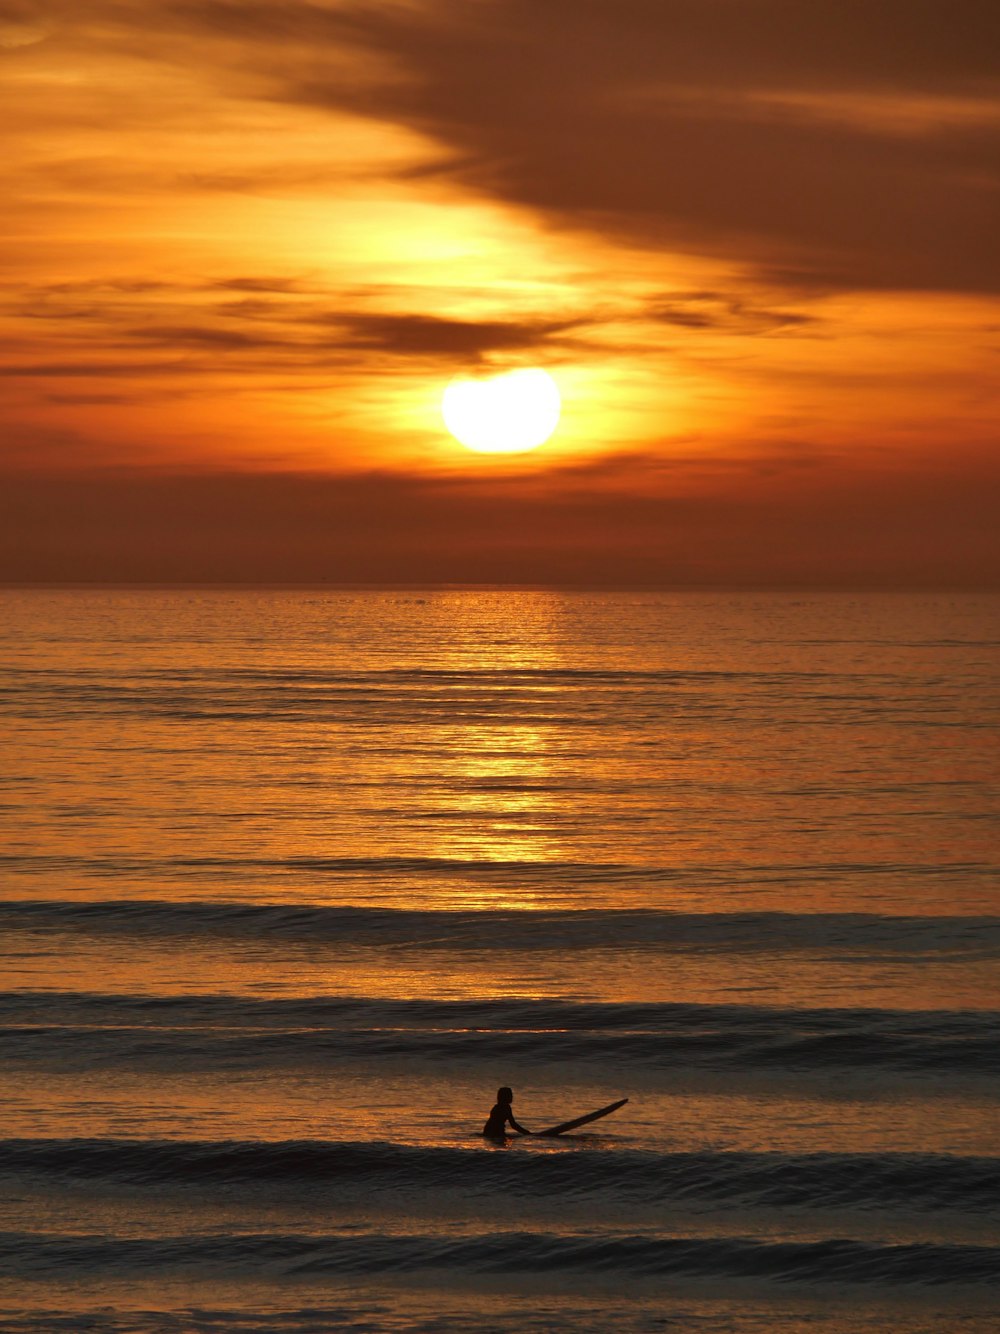 a person on a surfboard in the ocean at sunset